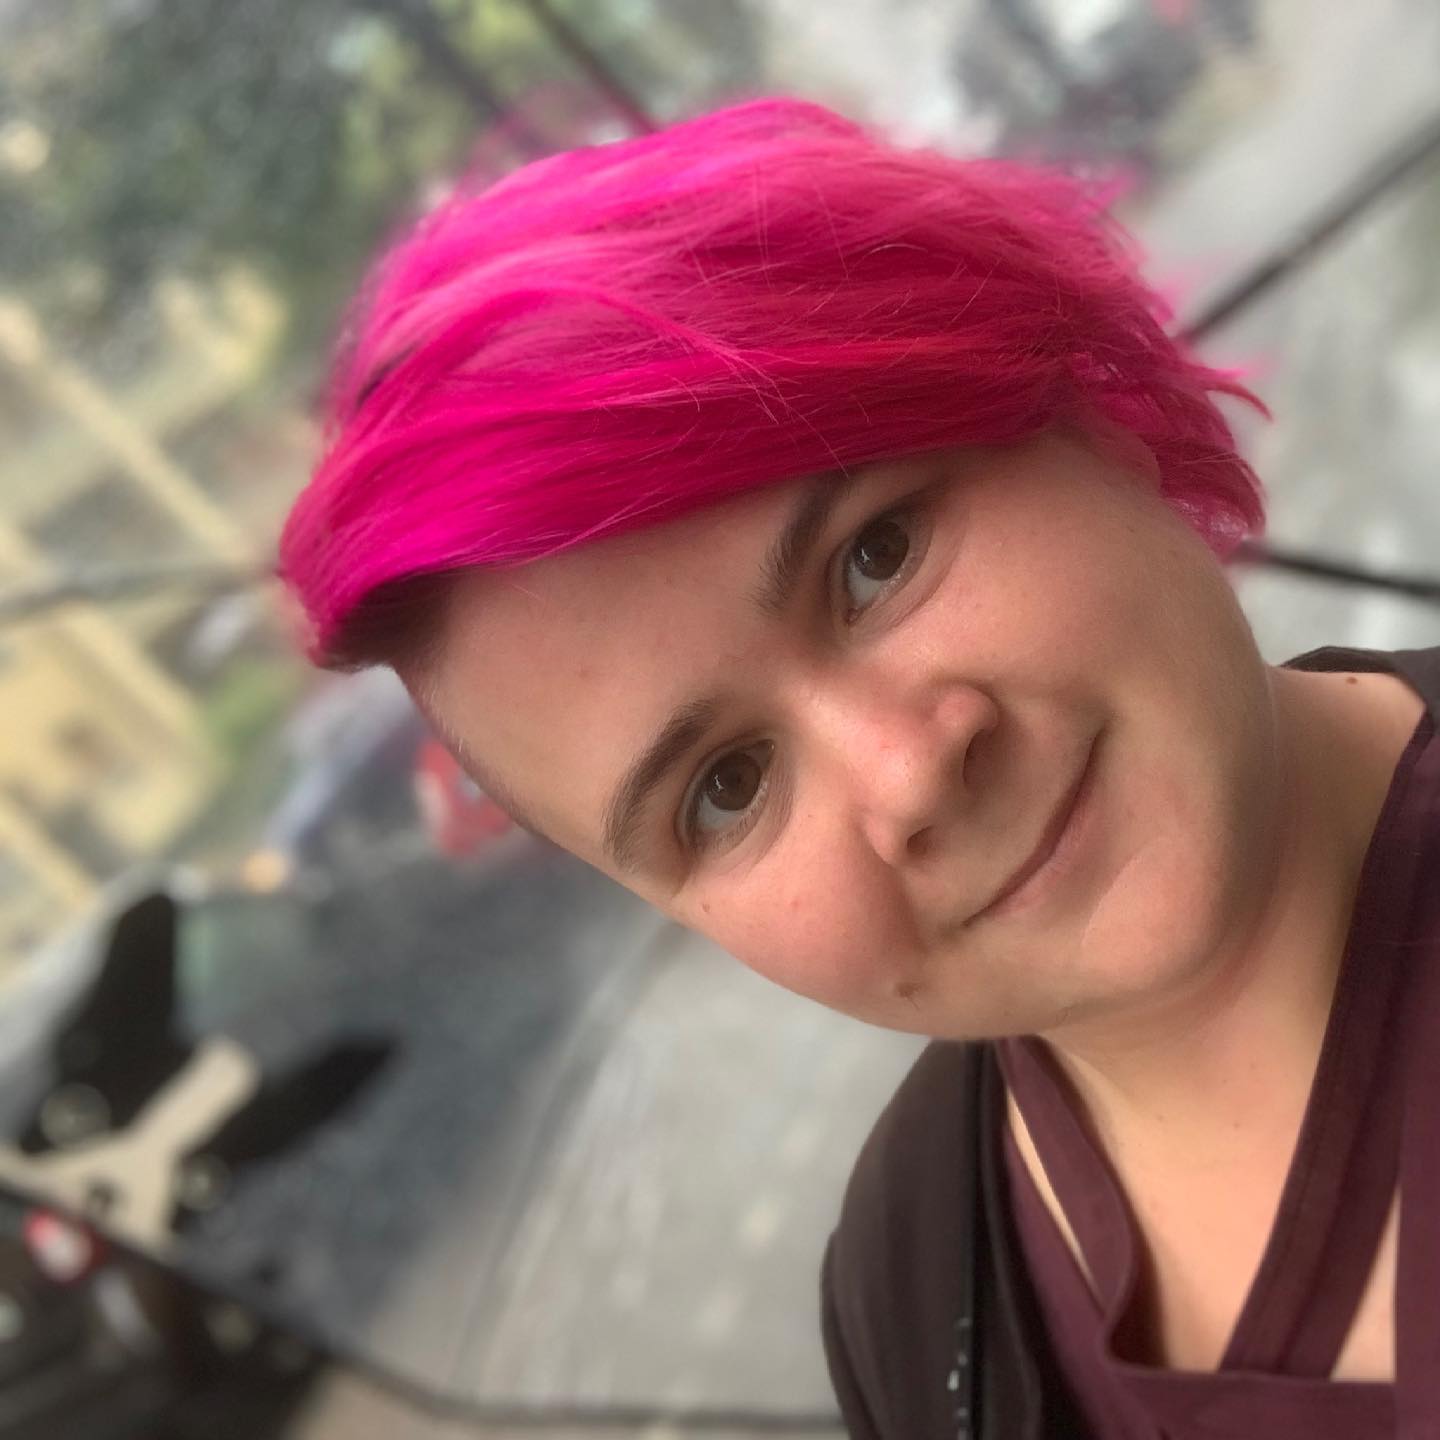 Portrait picture of a cis female with pink hair, pixie cut, smiling at the camera.